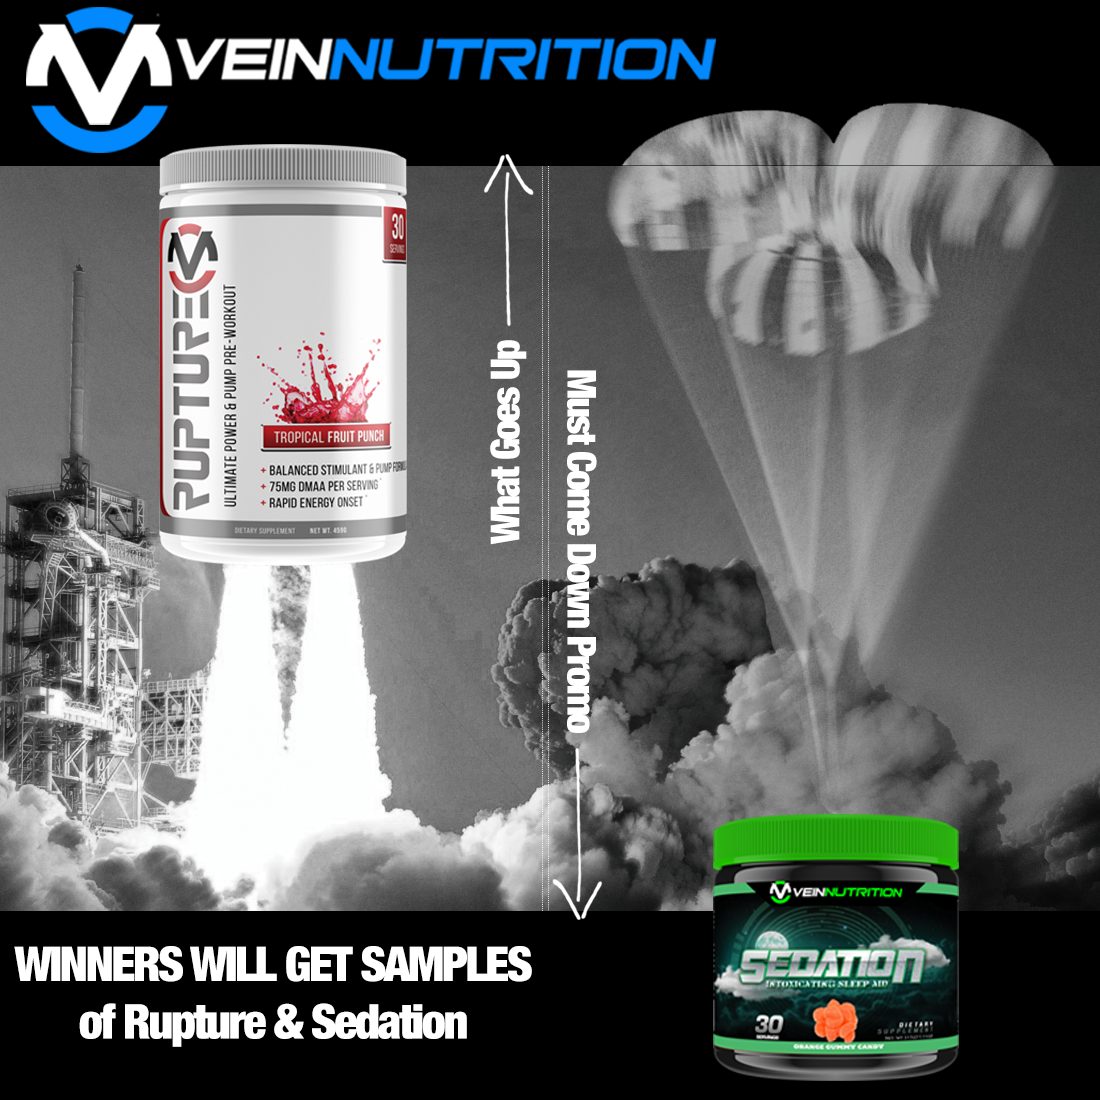 vein nutrition up and down2.png